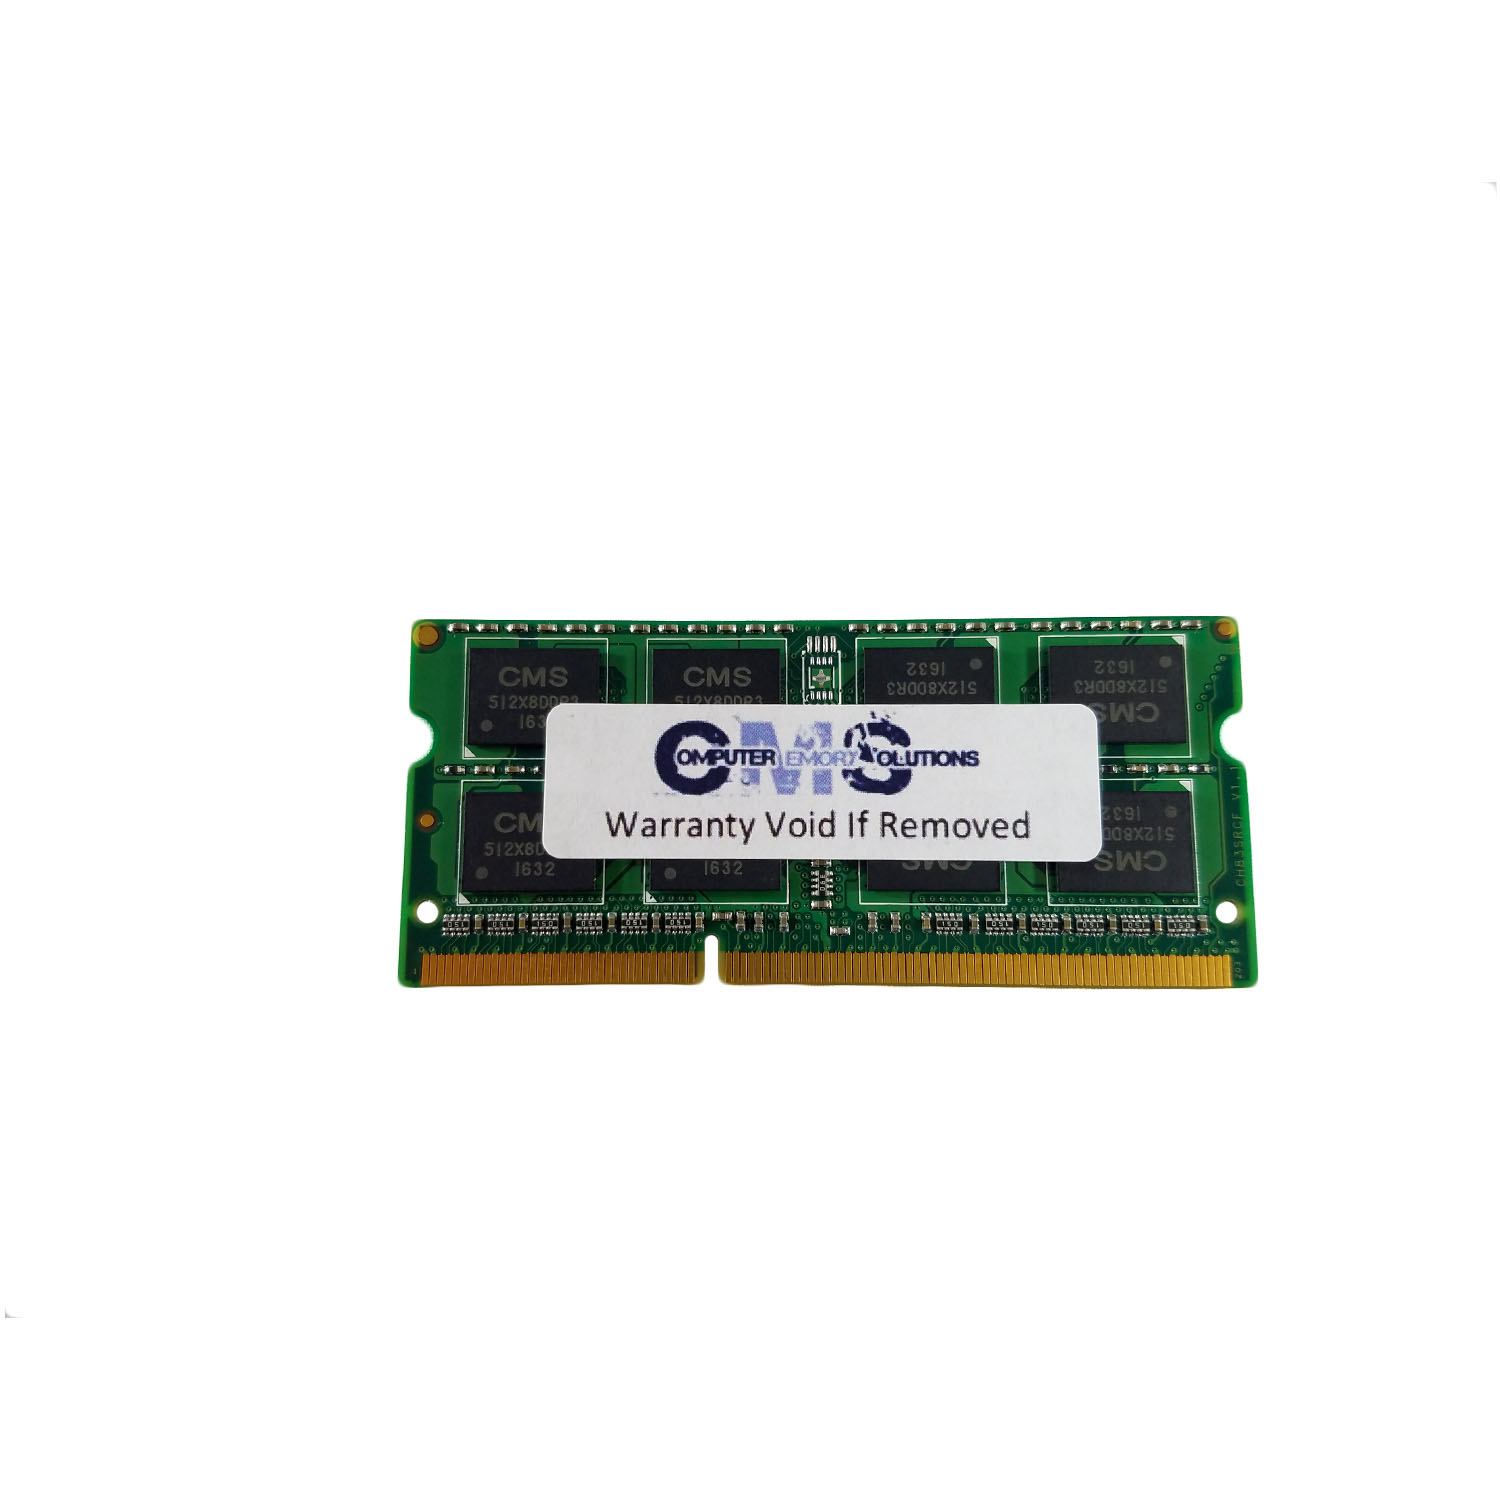 CMS 2GB (1X2GB) DDR3 8500 1066MHZ NON ECC SODIMM Memory Ram Compatible with Asus/Asmobile Eee Pc X101Ch-Eu17-Wt 10.1" Netbook - B123 - image 1 of 3